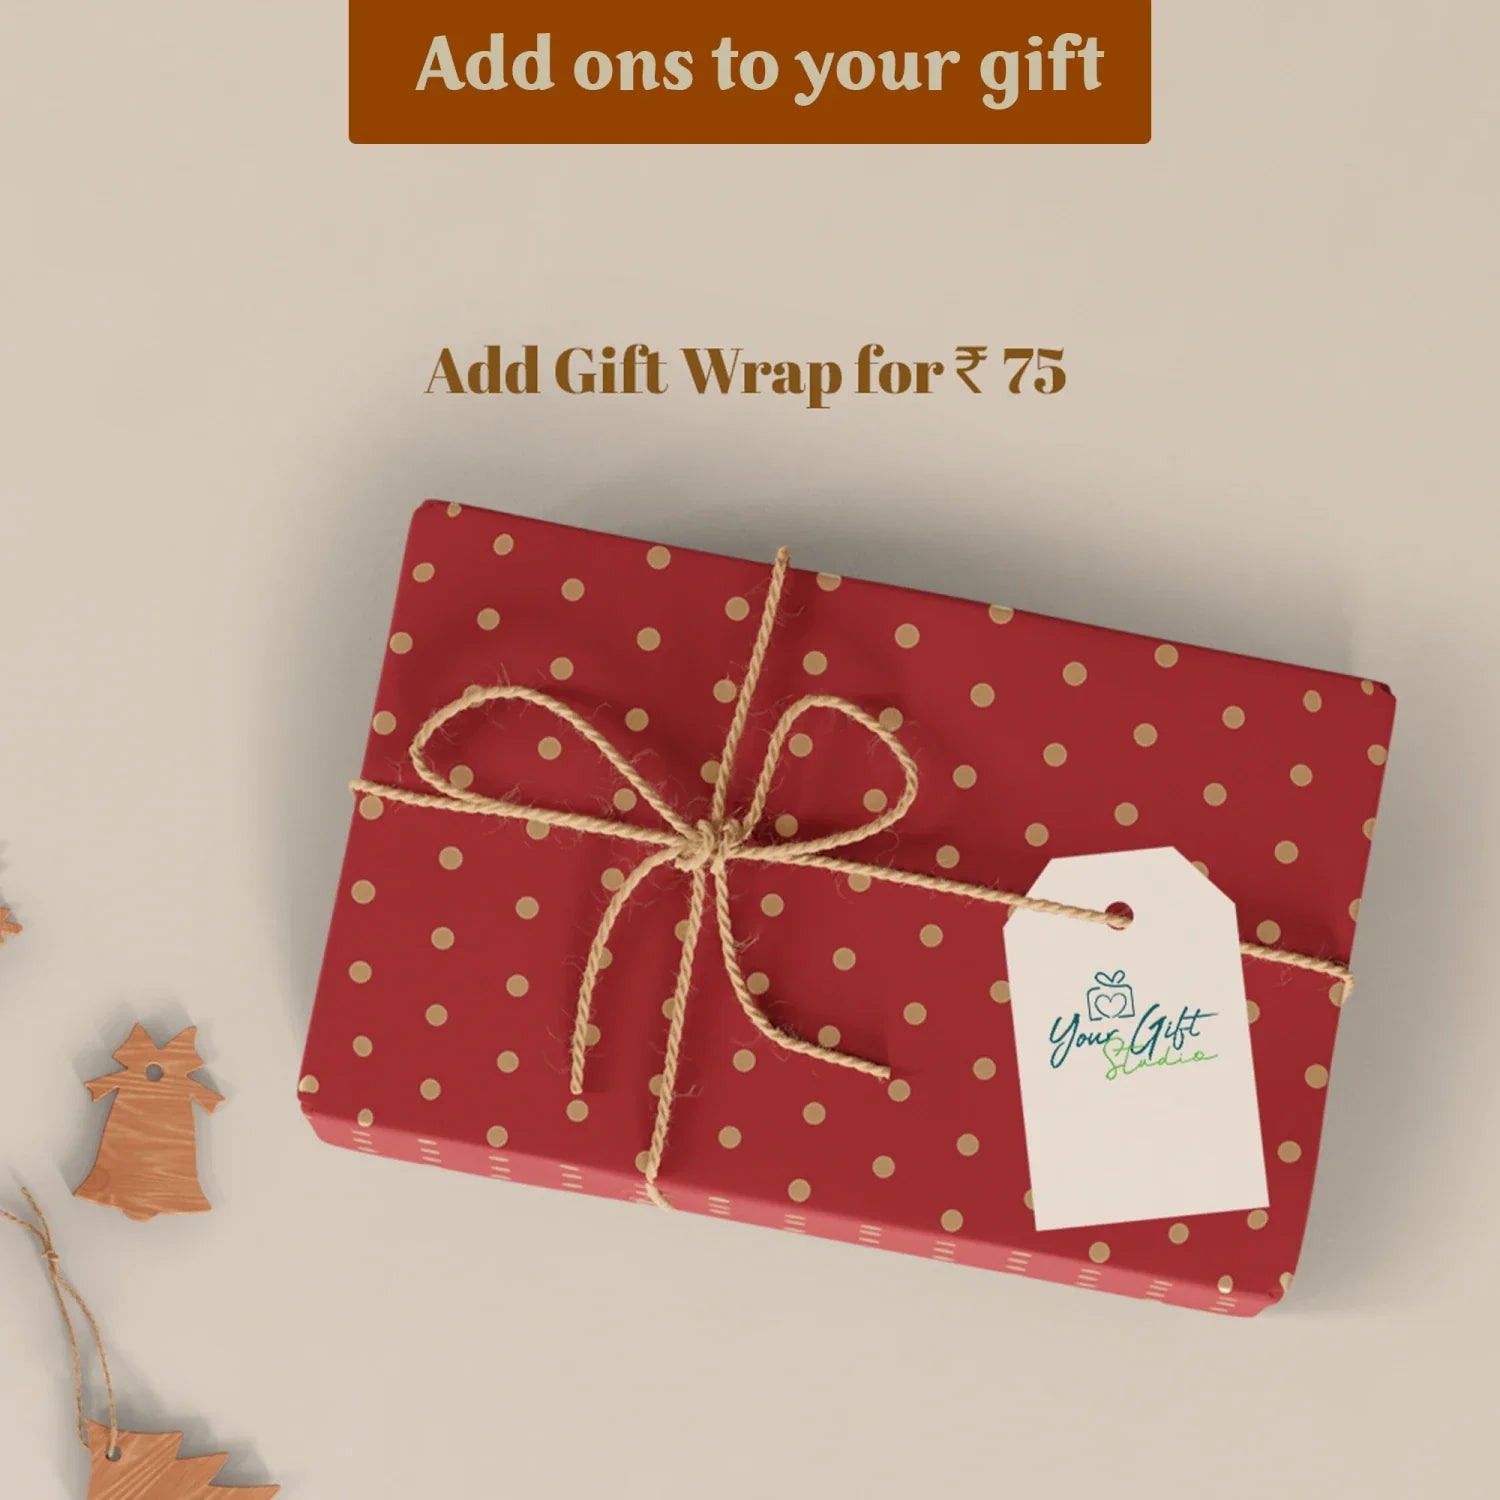 Pack this gift beautifully and make it perfect for gifting it to your loved ones!